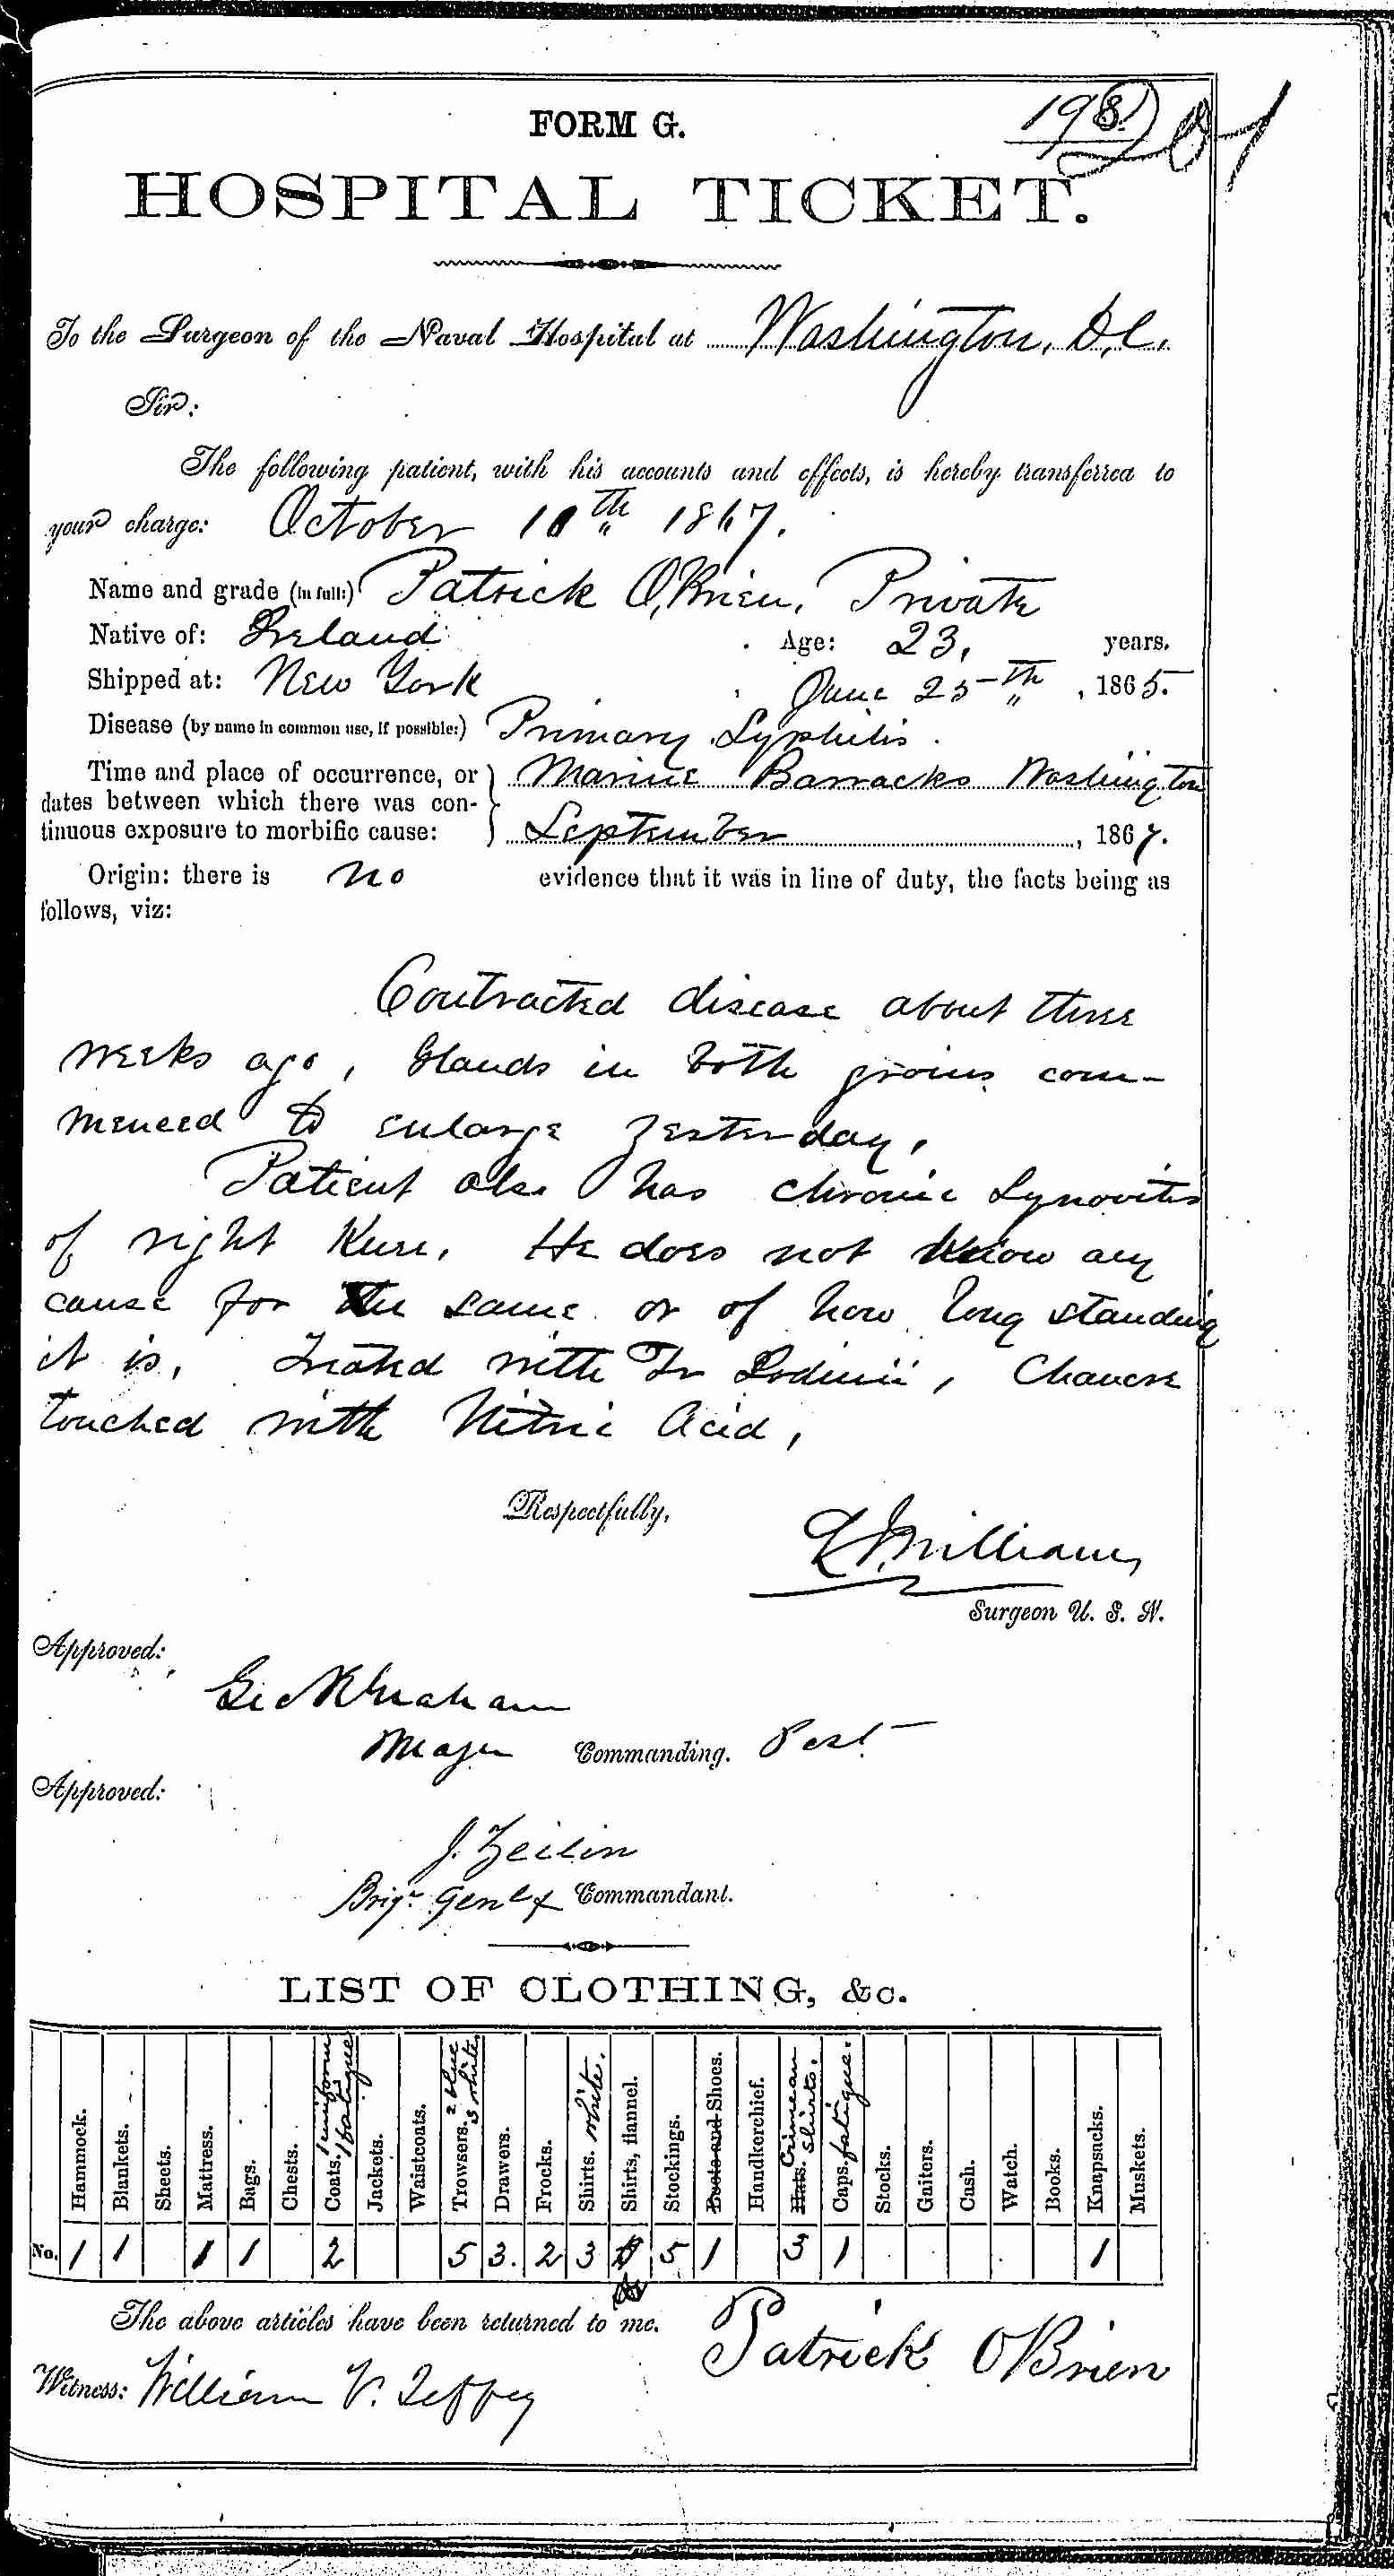 Entry for Patrick O'Brien (page 1 of 2) in the log Hospital Tickets and Case Papers - Naval Hospital - Washington, D.C. - 1866-68